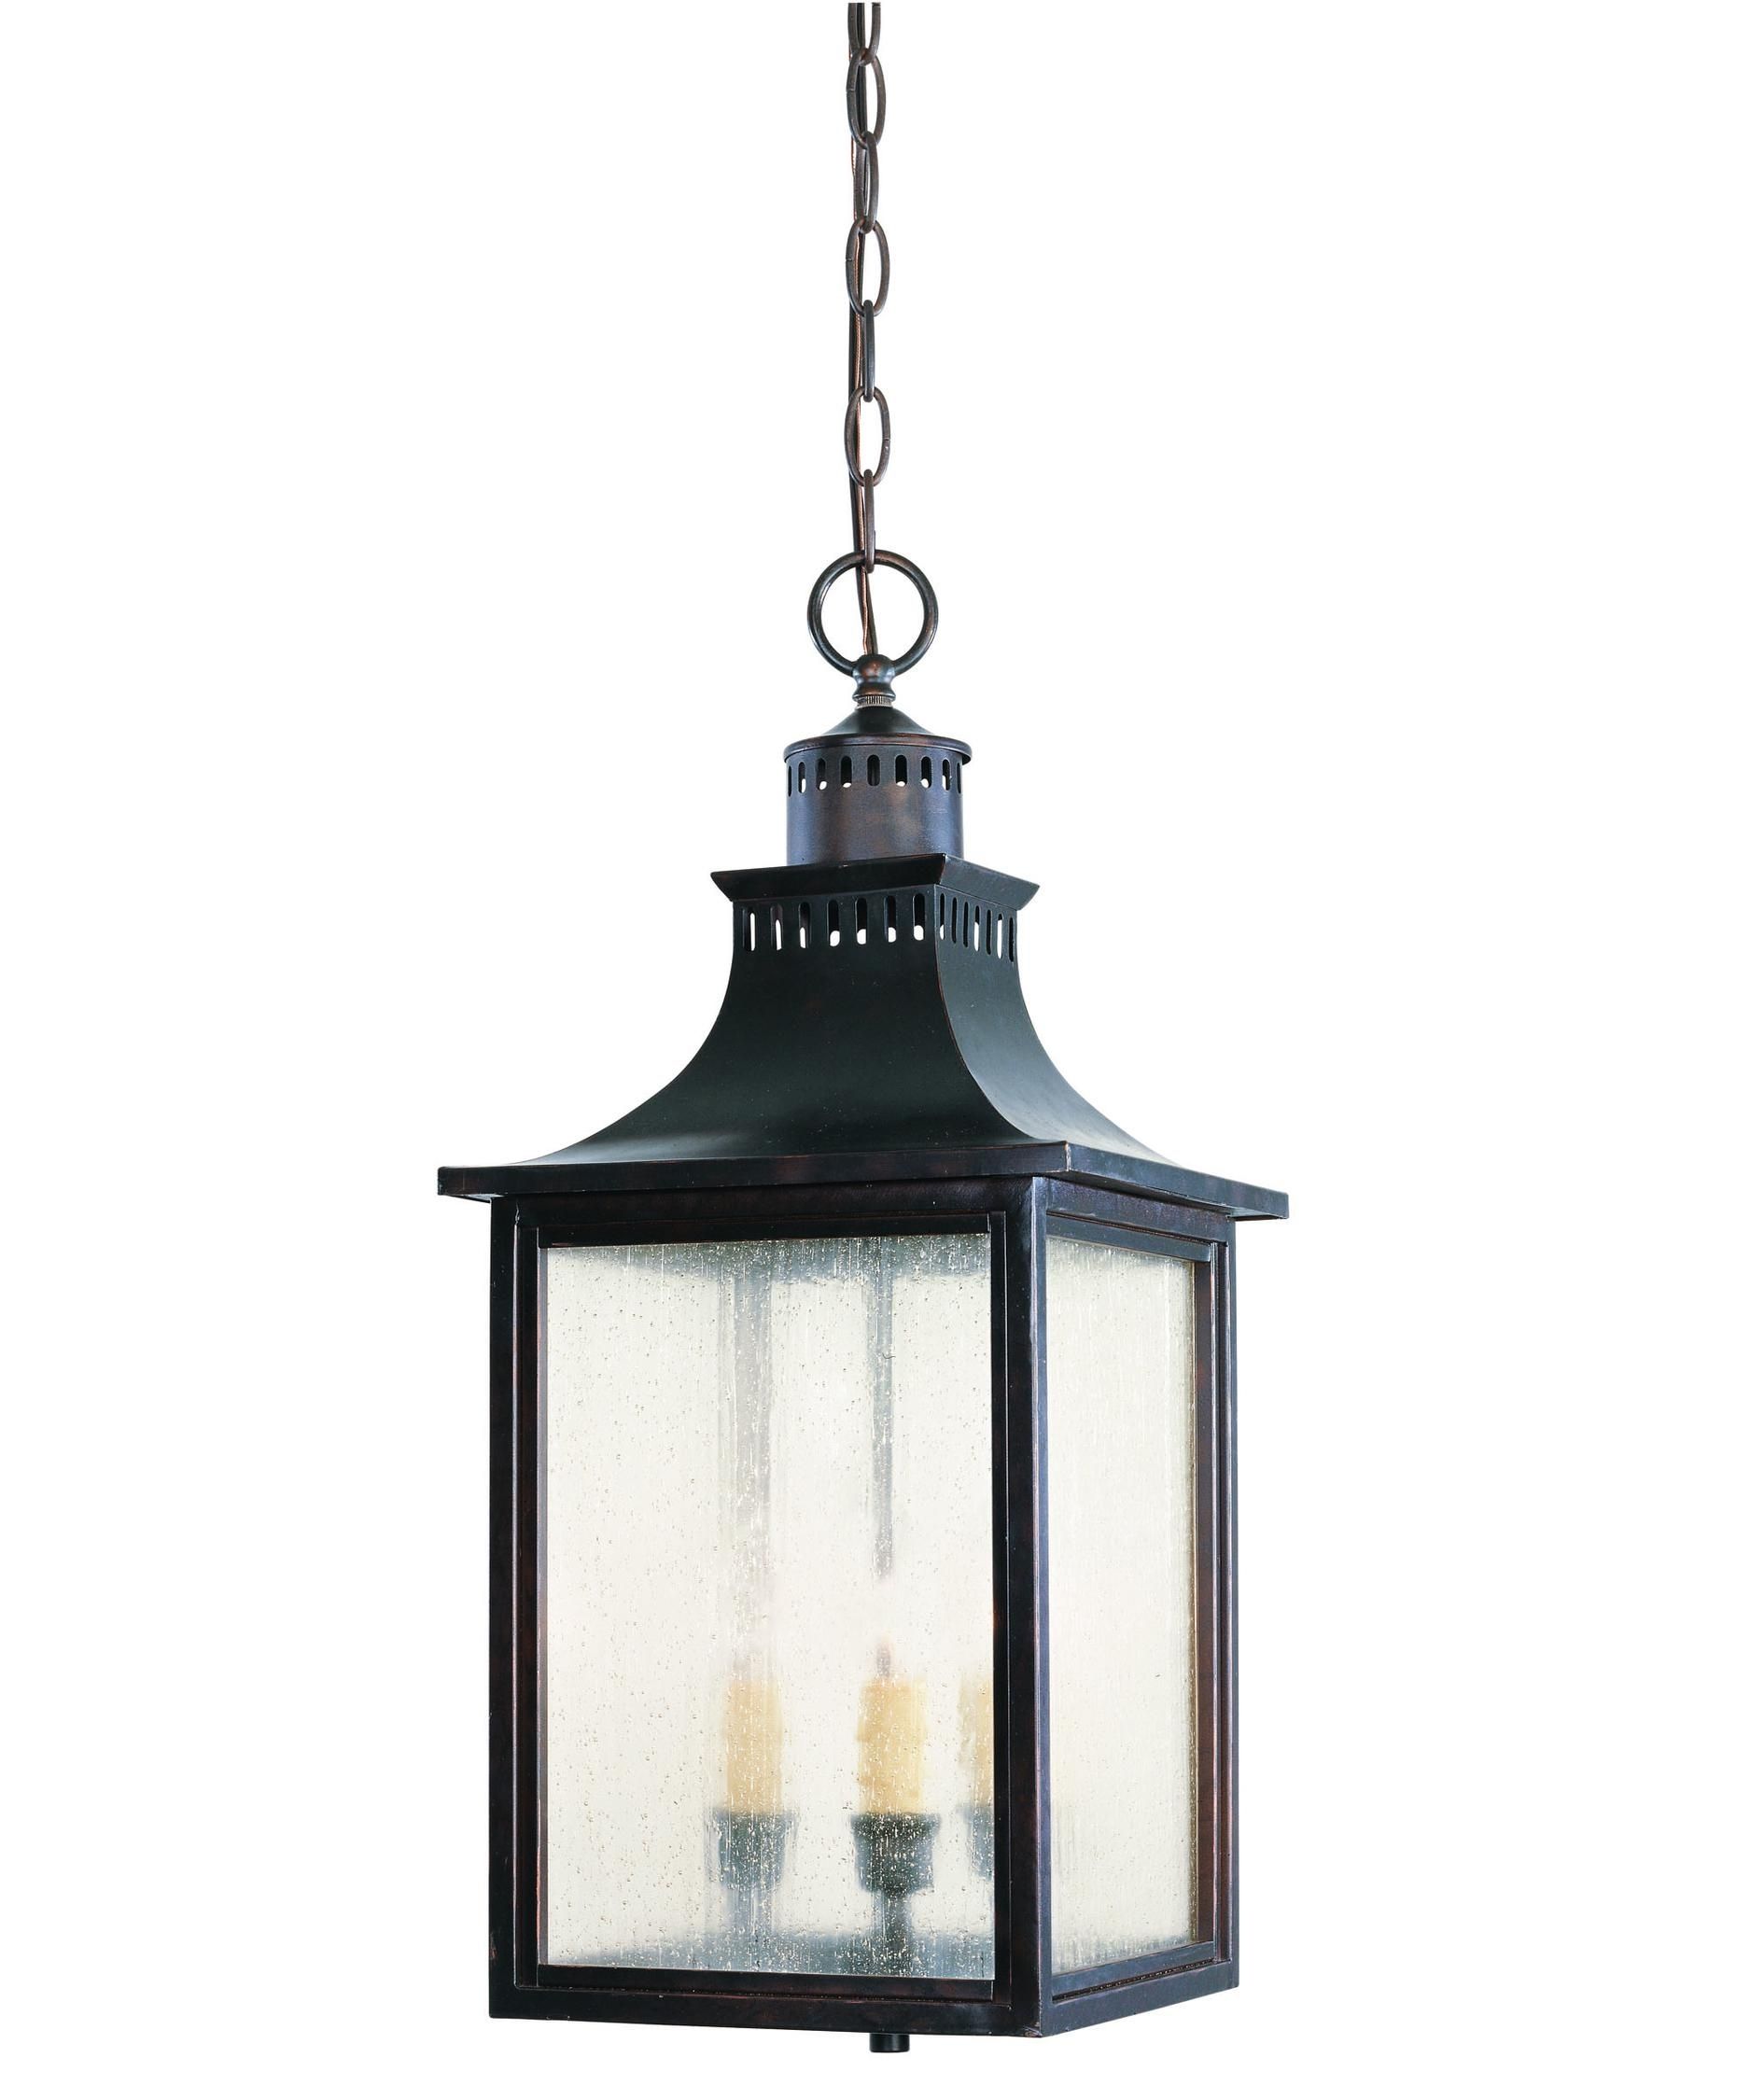 Savoy House 5 256 Monte Grande 10 Inch Wide 3 Light Outdoor Hanging Within Rustic Outdoor Electric Lanterns (View 9 of 20)